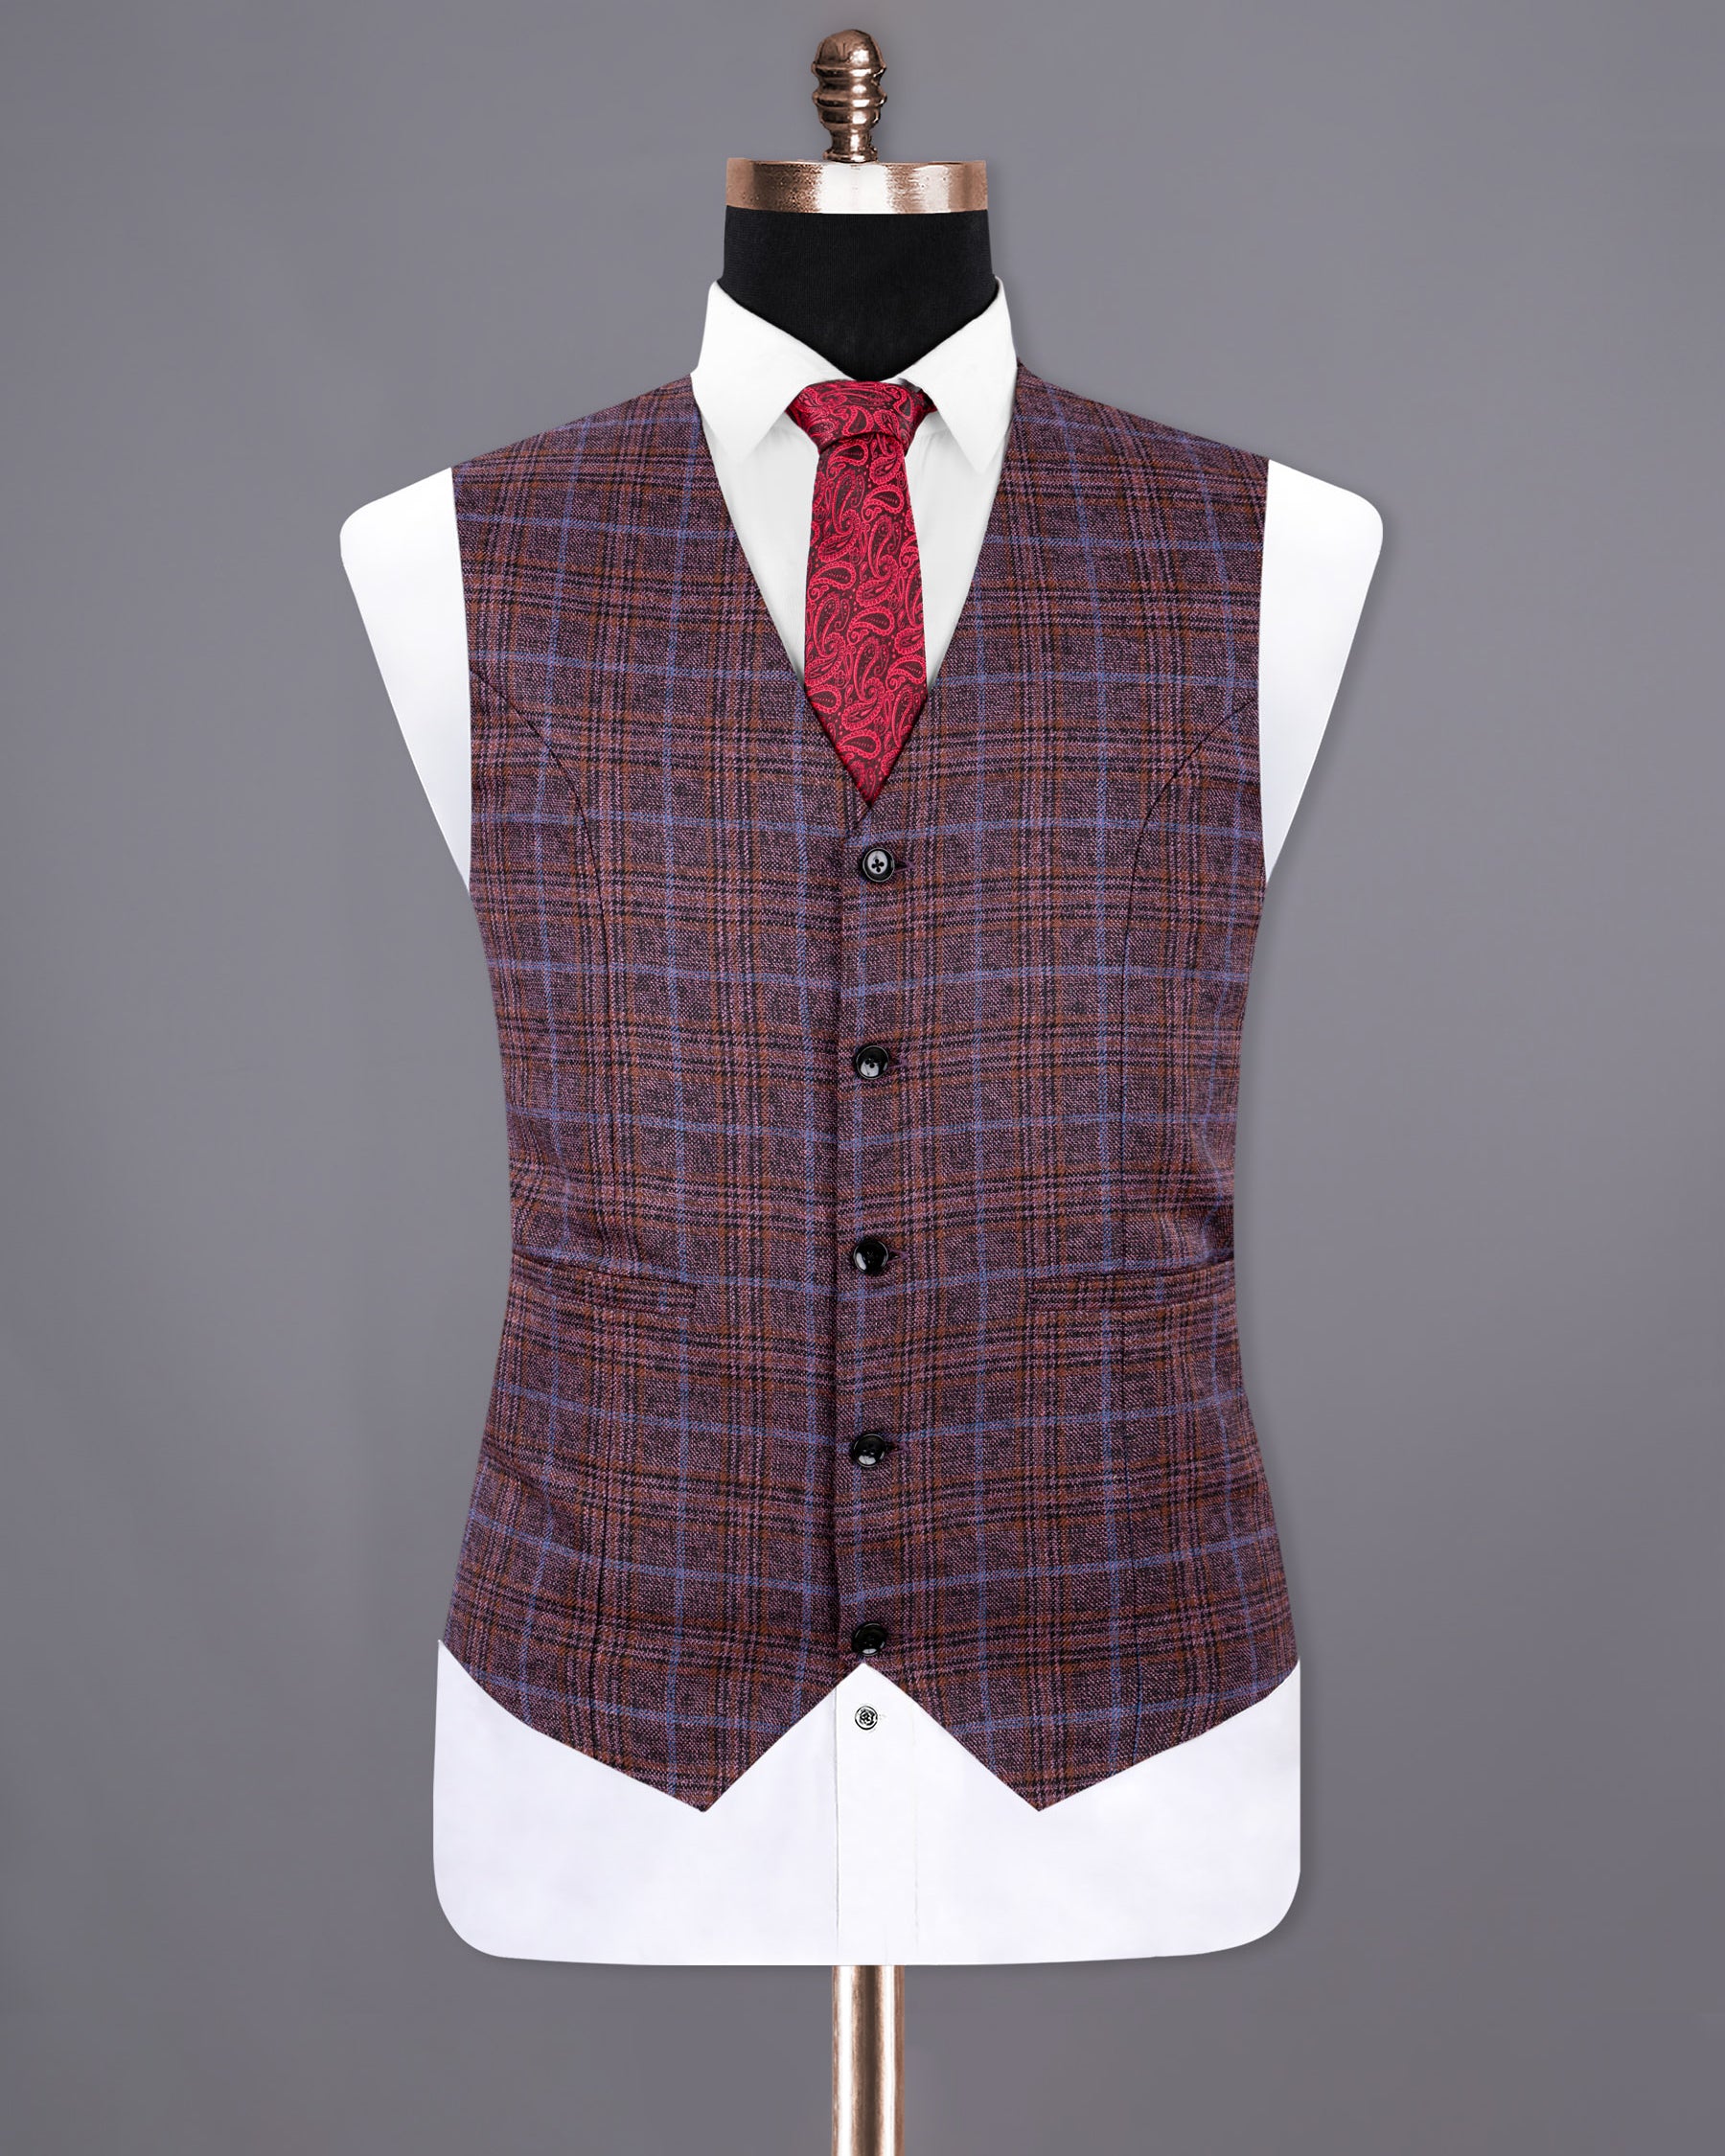 Old Copper Colorful Plaid Wool Rich Waistcoat V1235-58, V1235-60, V1235-36, V1235-38, V1235-40, V1235-42, V1235-44, V1235-46, V1235-48, V1235-50, V1235-52, V1235-54, V1235-56